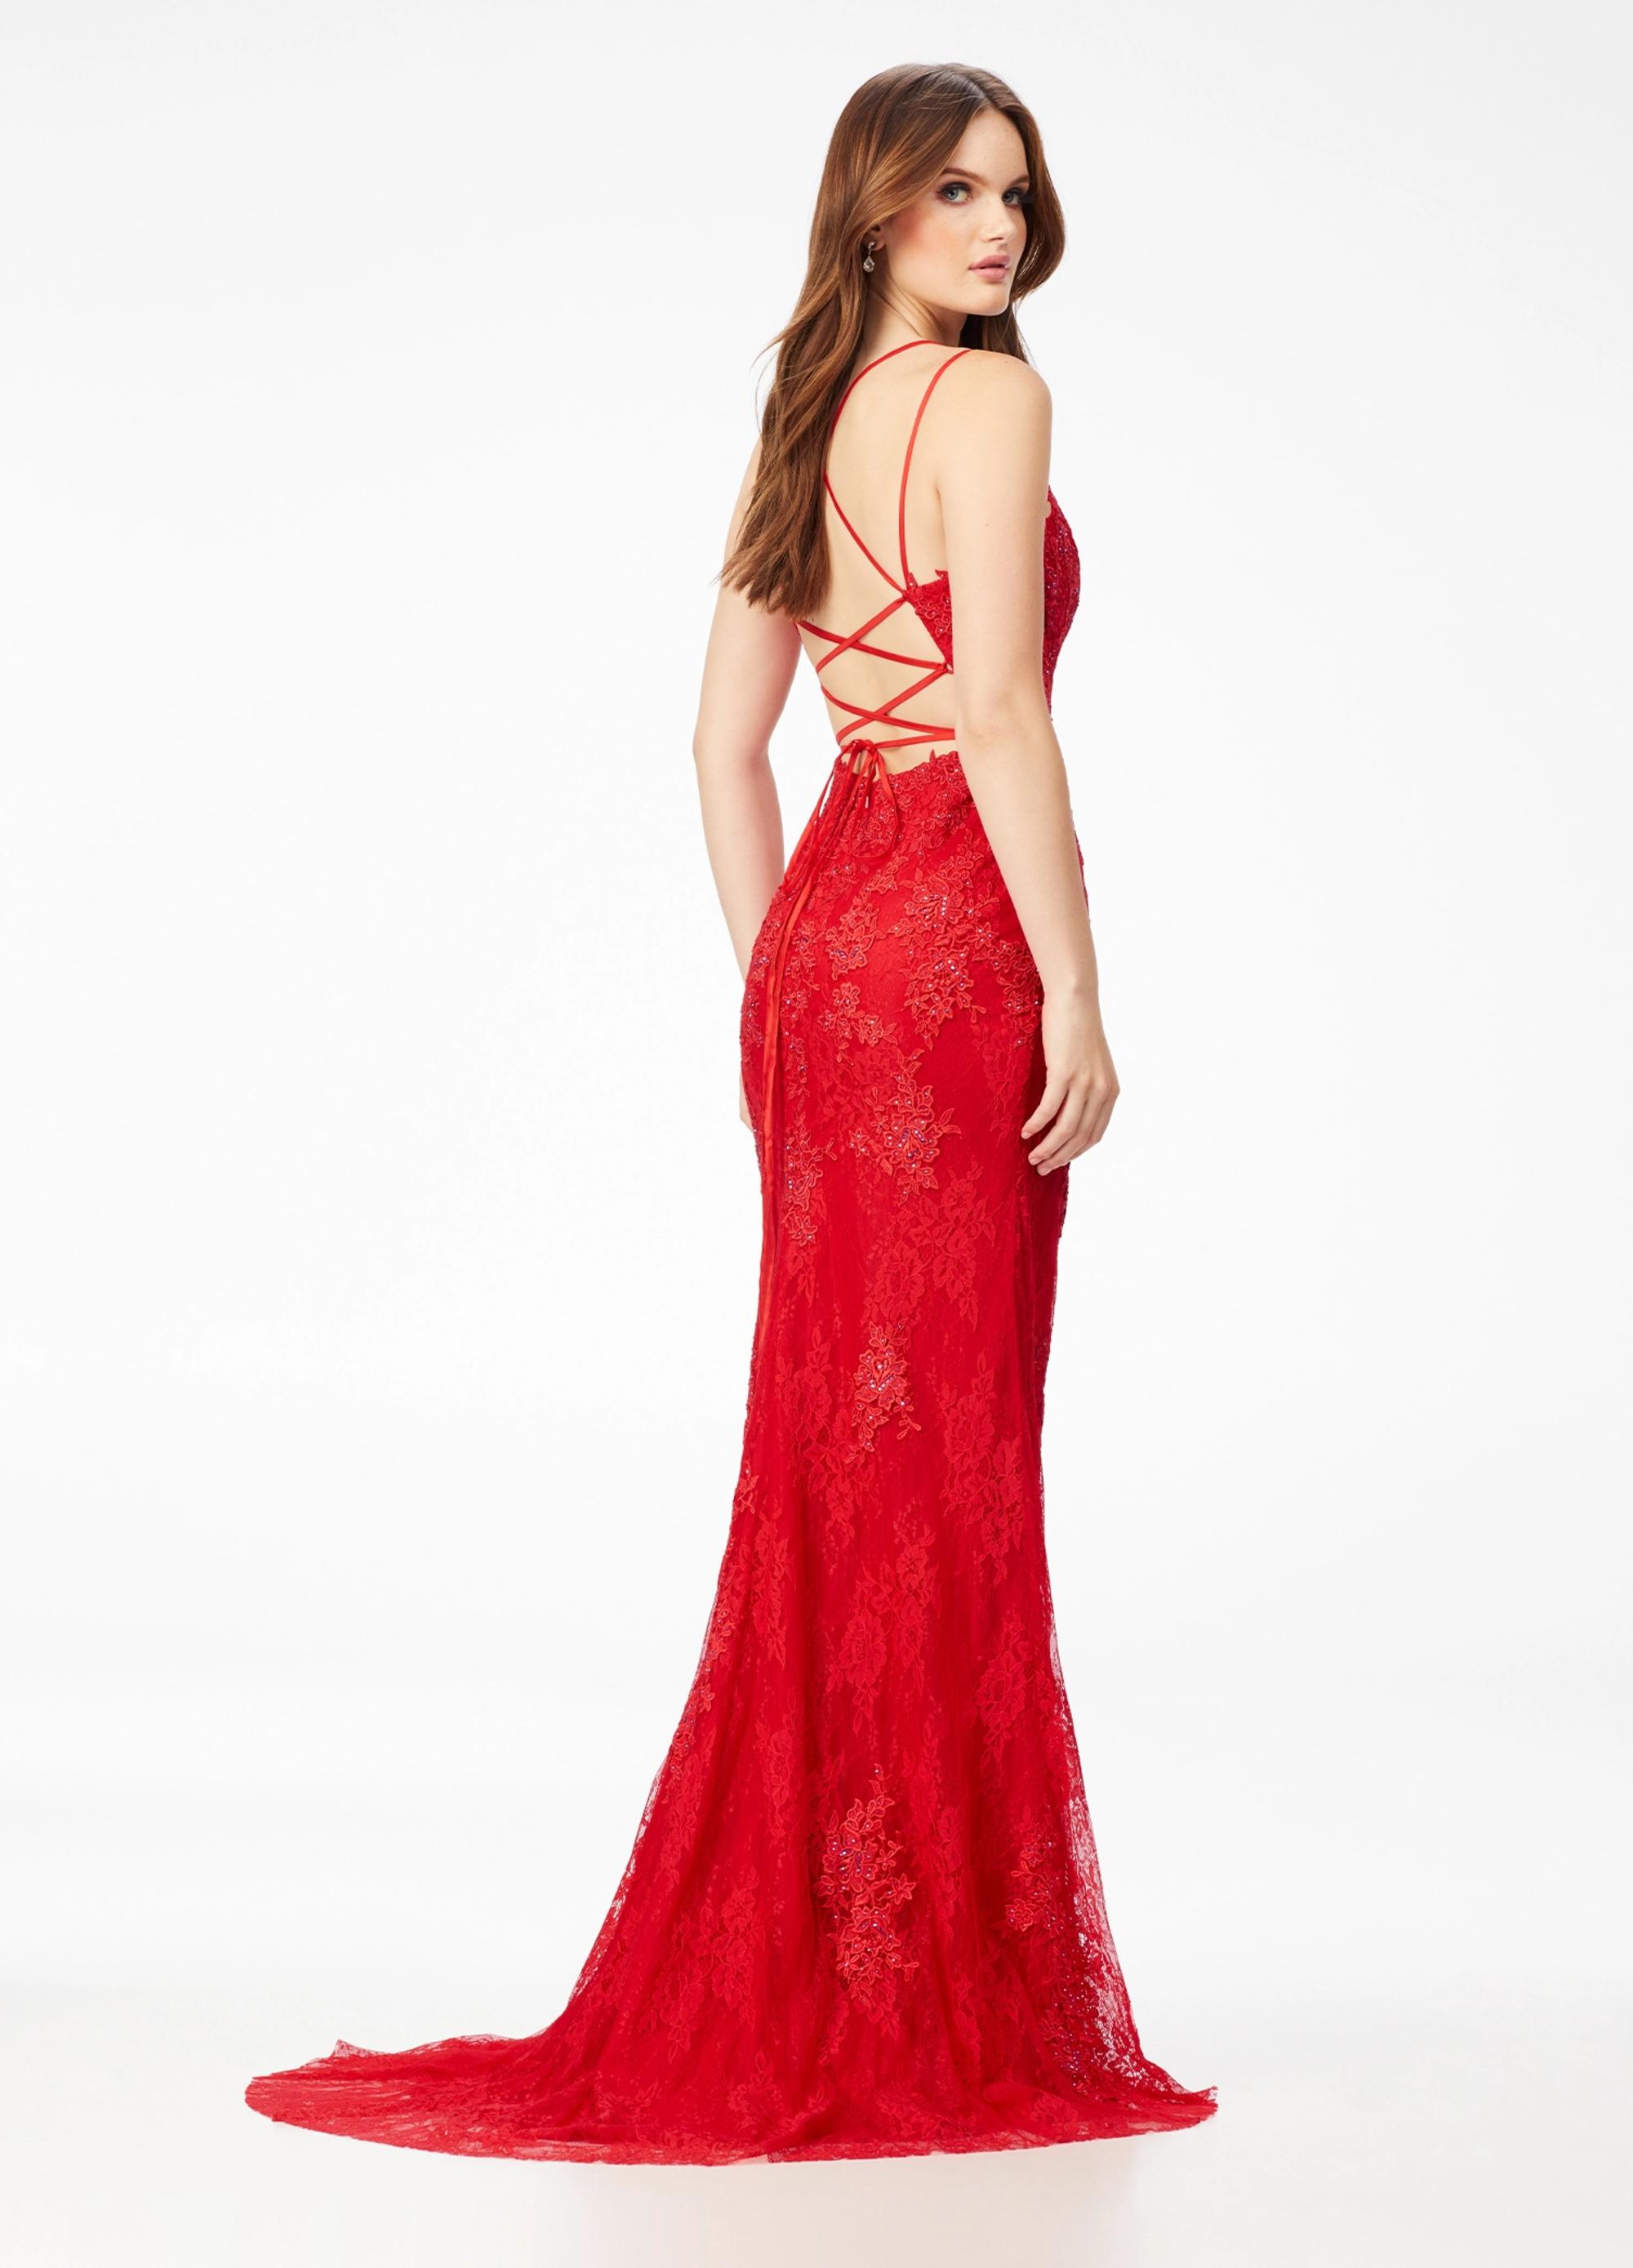 ASHLEYlauren - Lace Embroidered Gown with Lace up Back | ASHLEYlauren